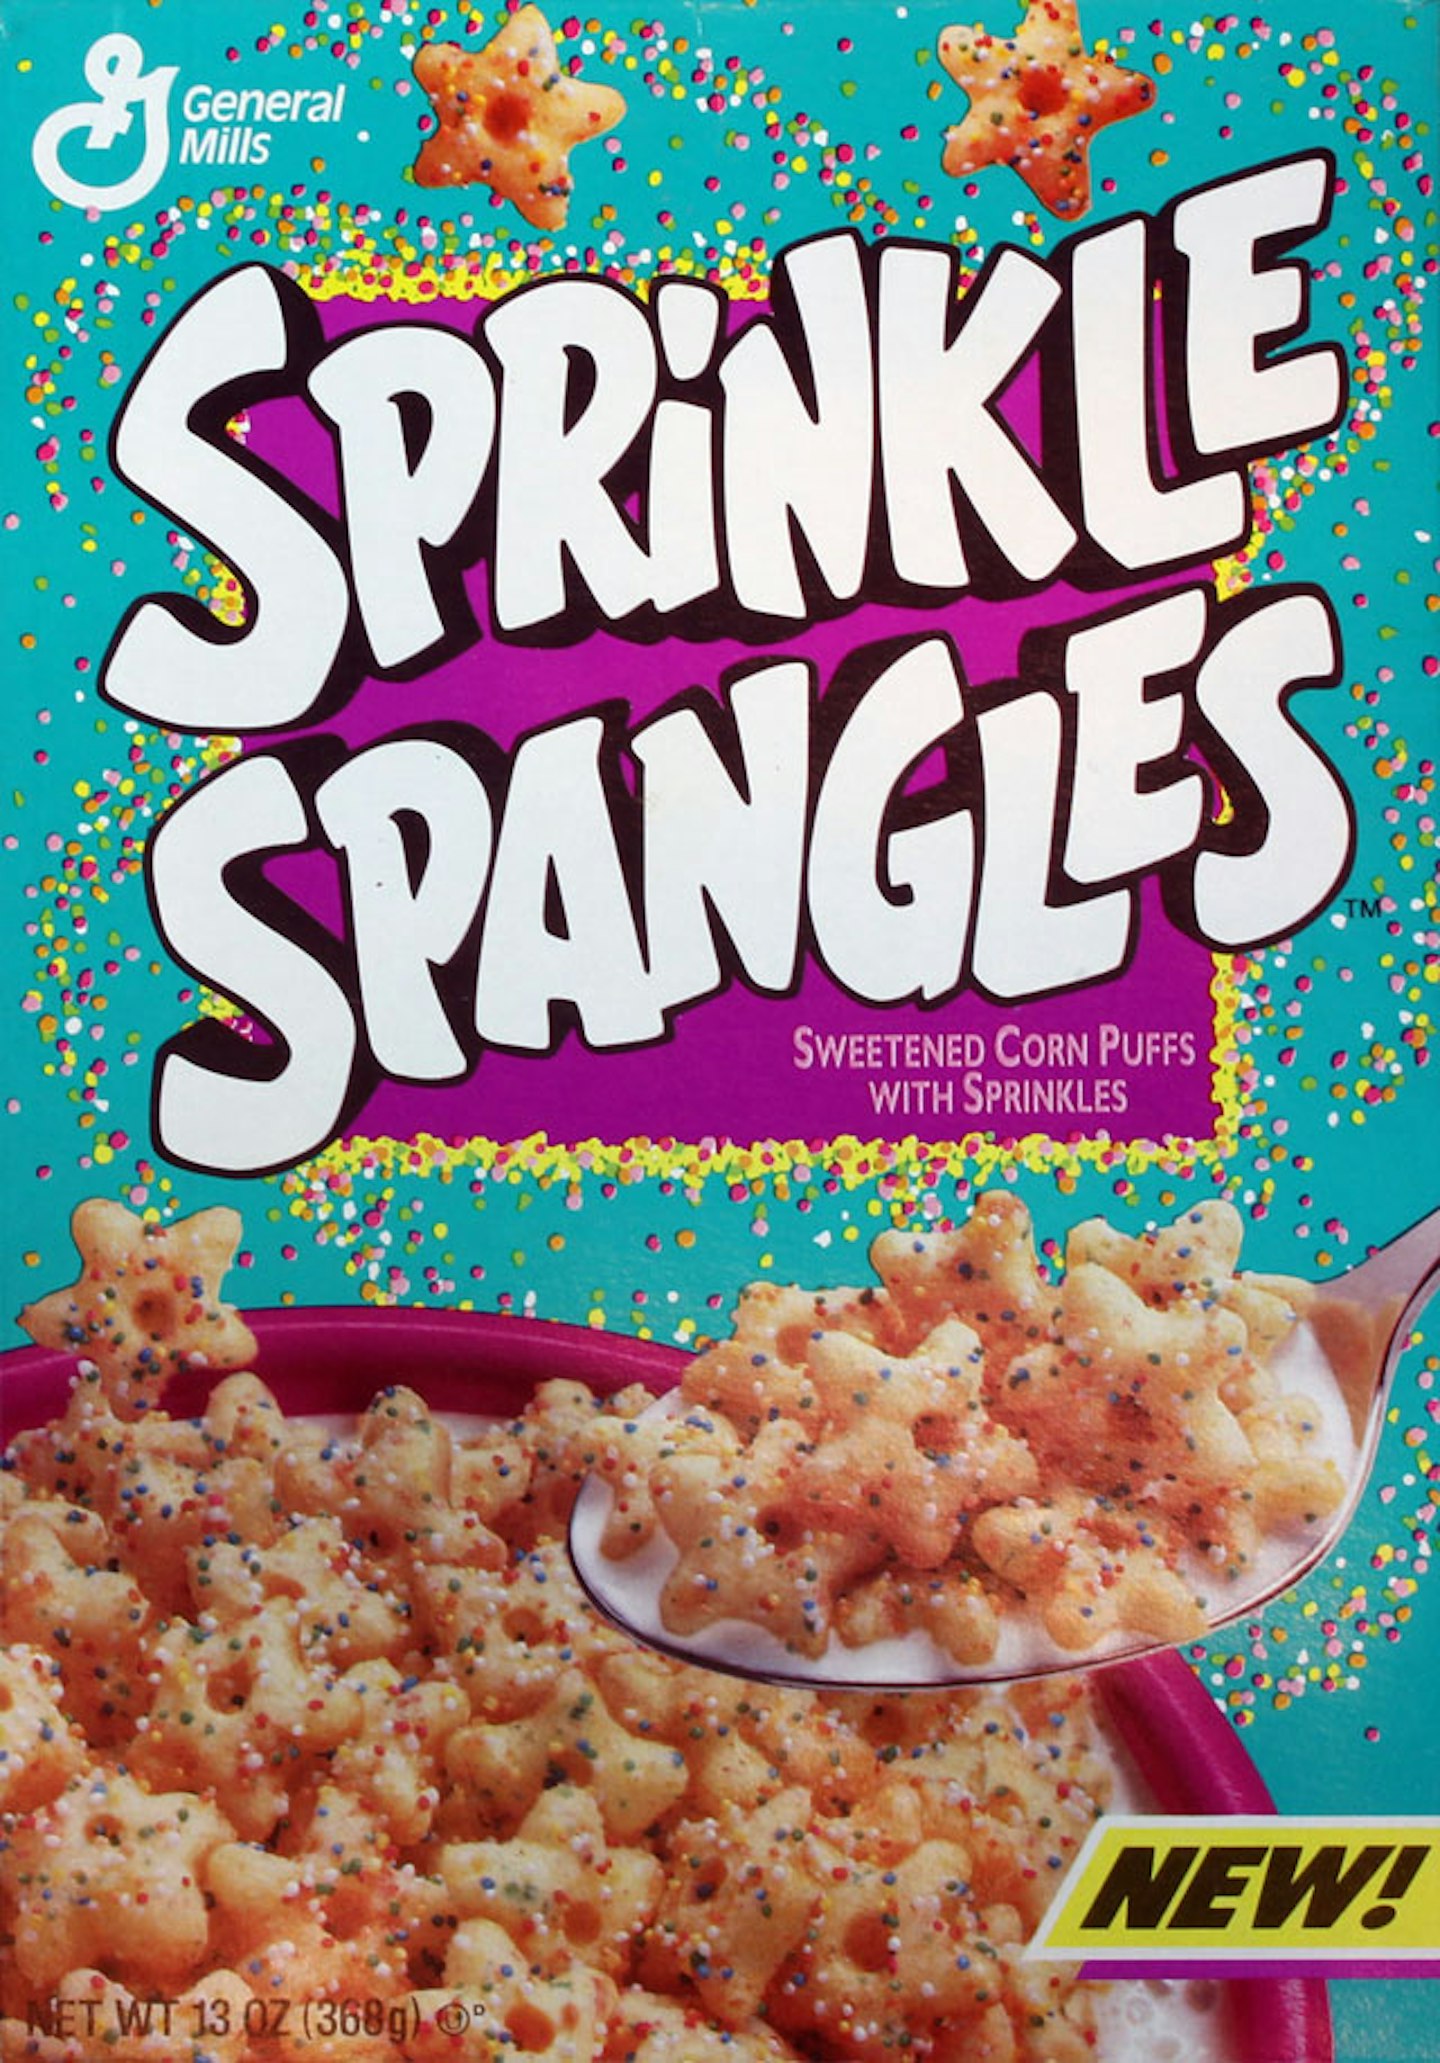 Discontinued cereals Sprinkle Spangles